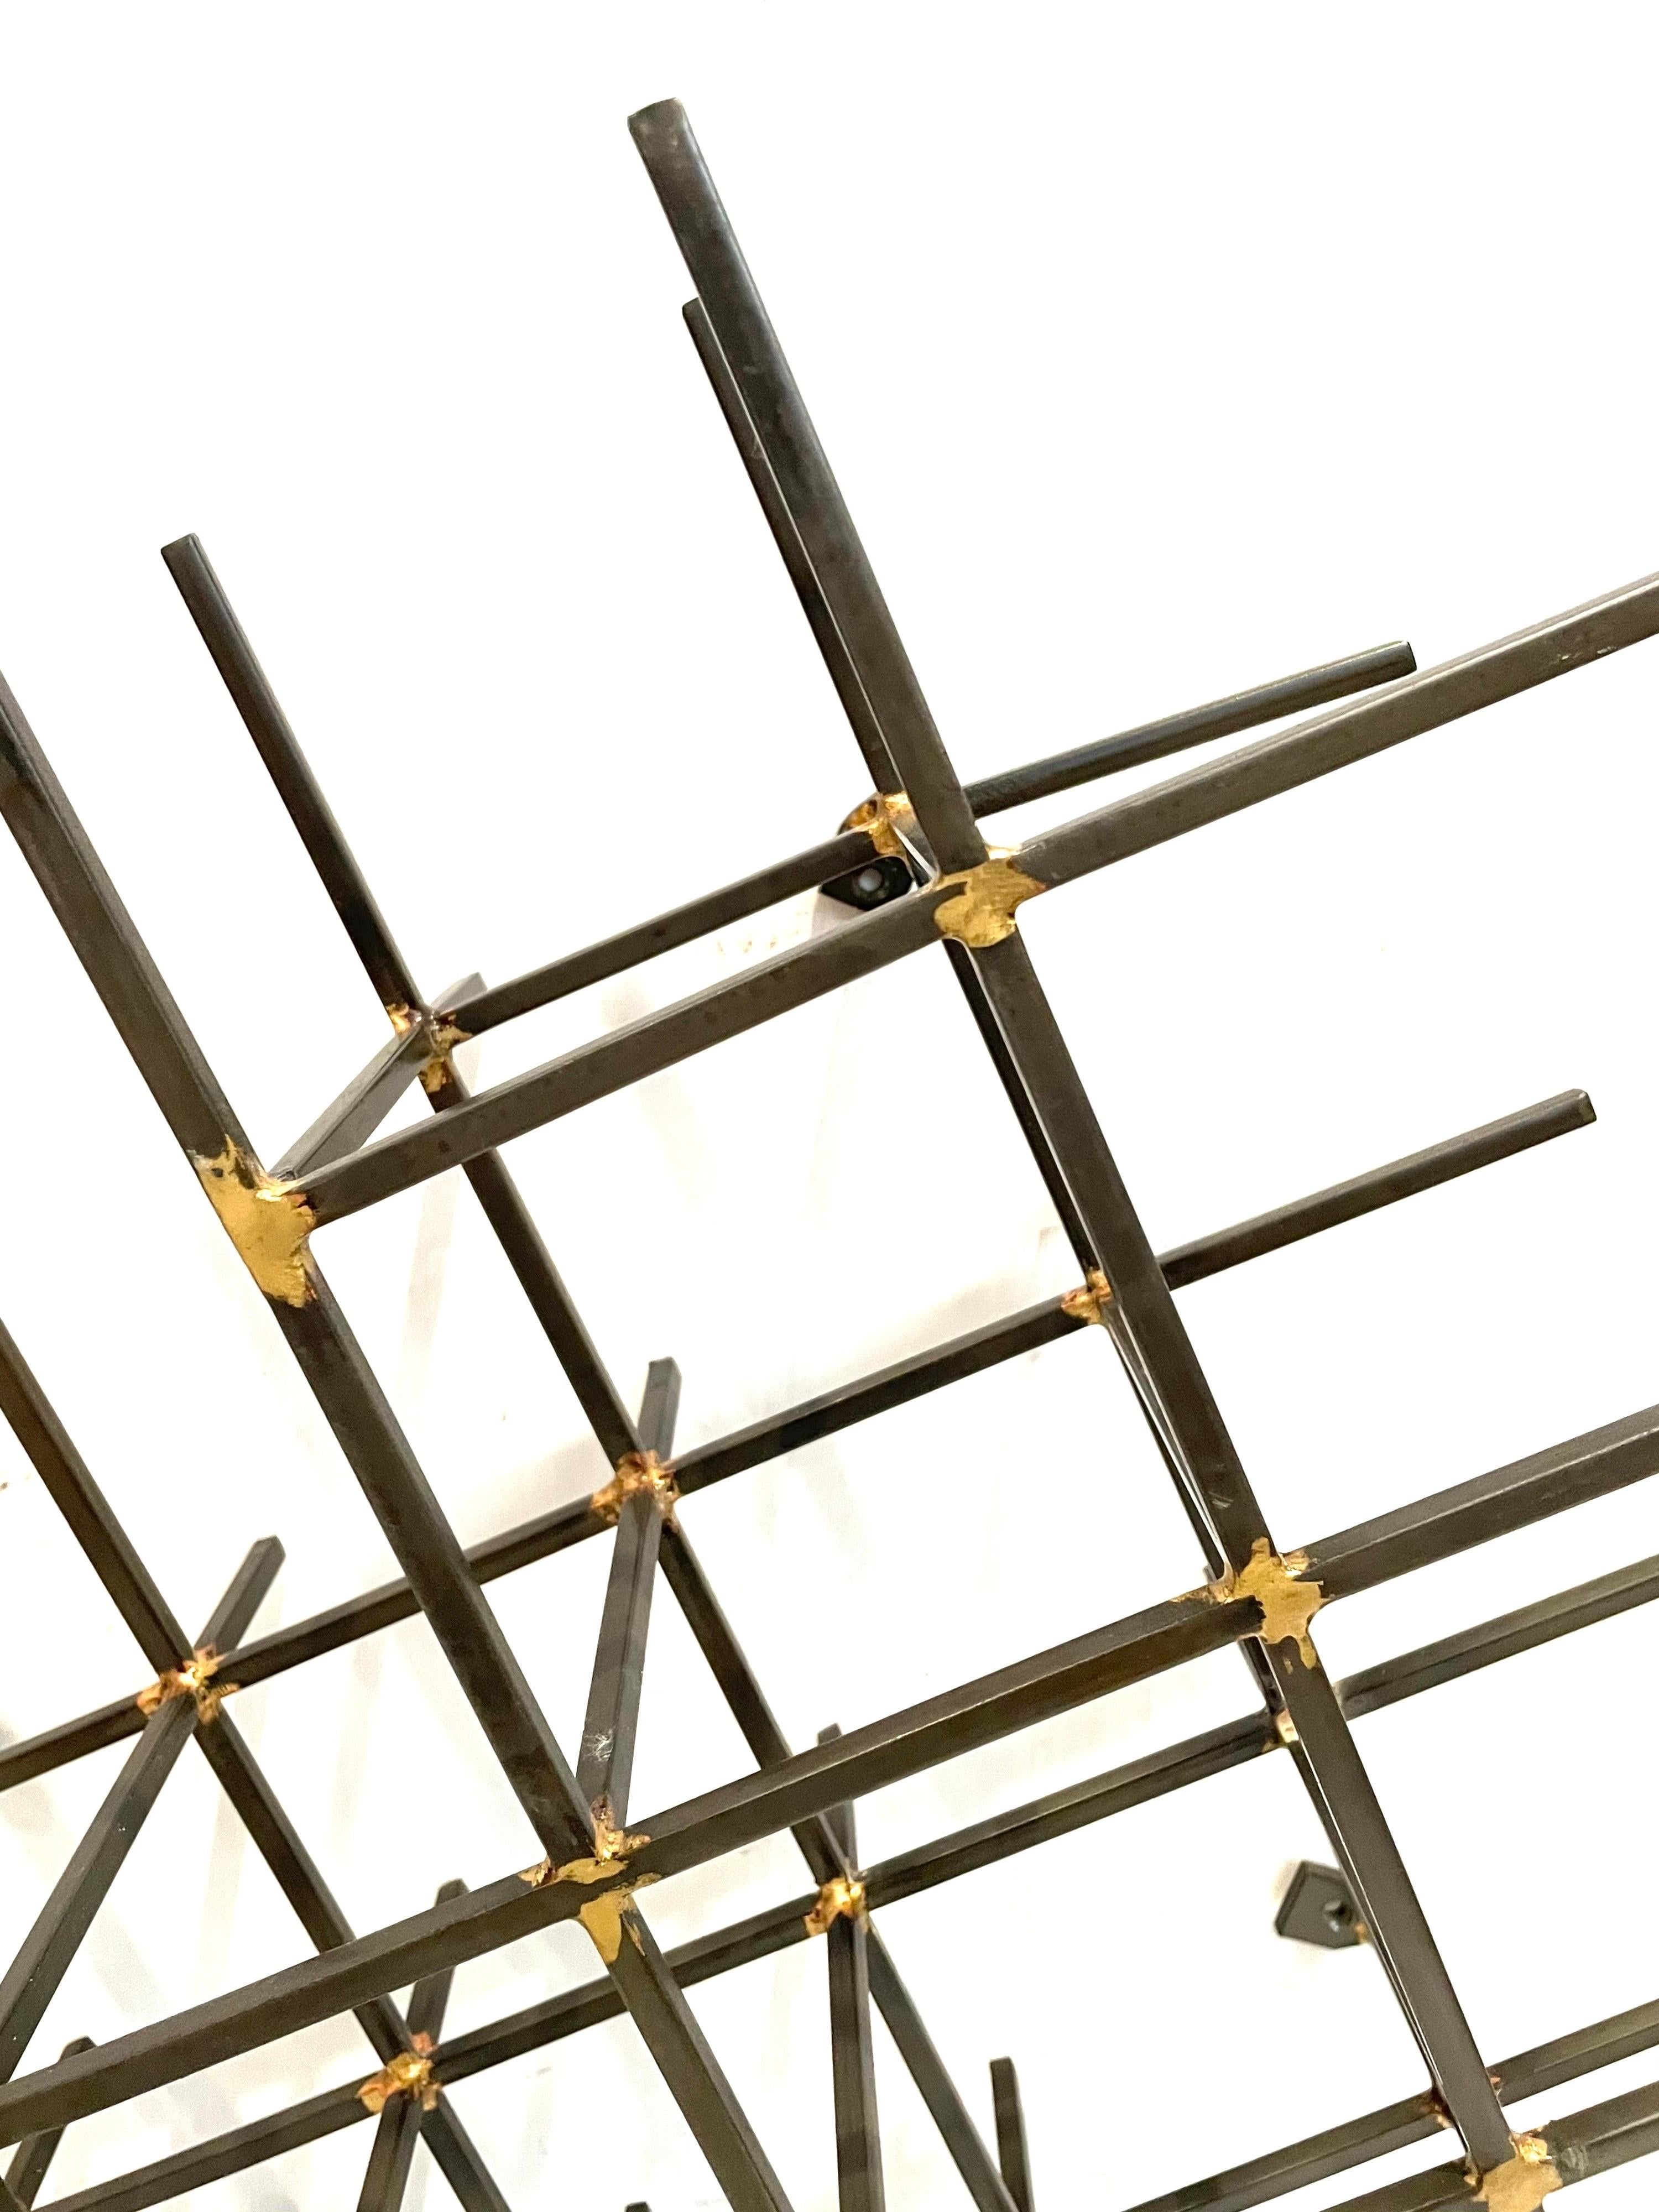 North American Modernist Abstract Steel & Brass Welded Wall Sculpture For Sale